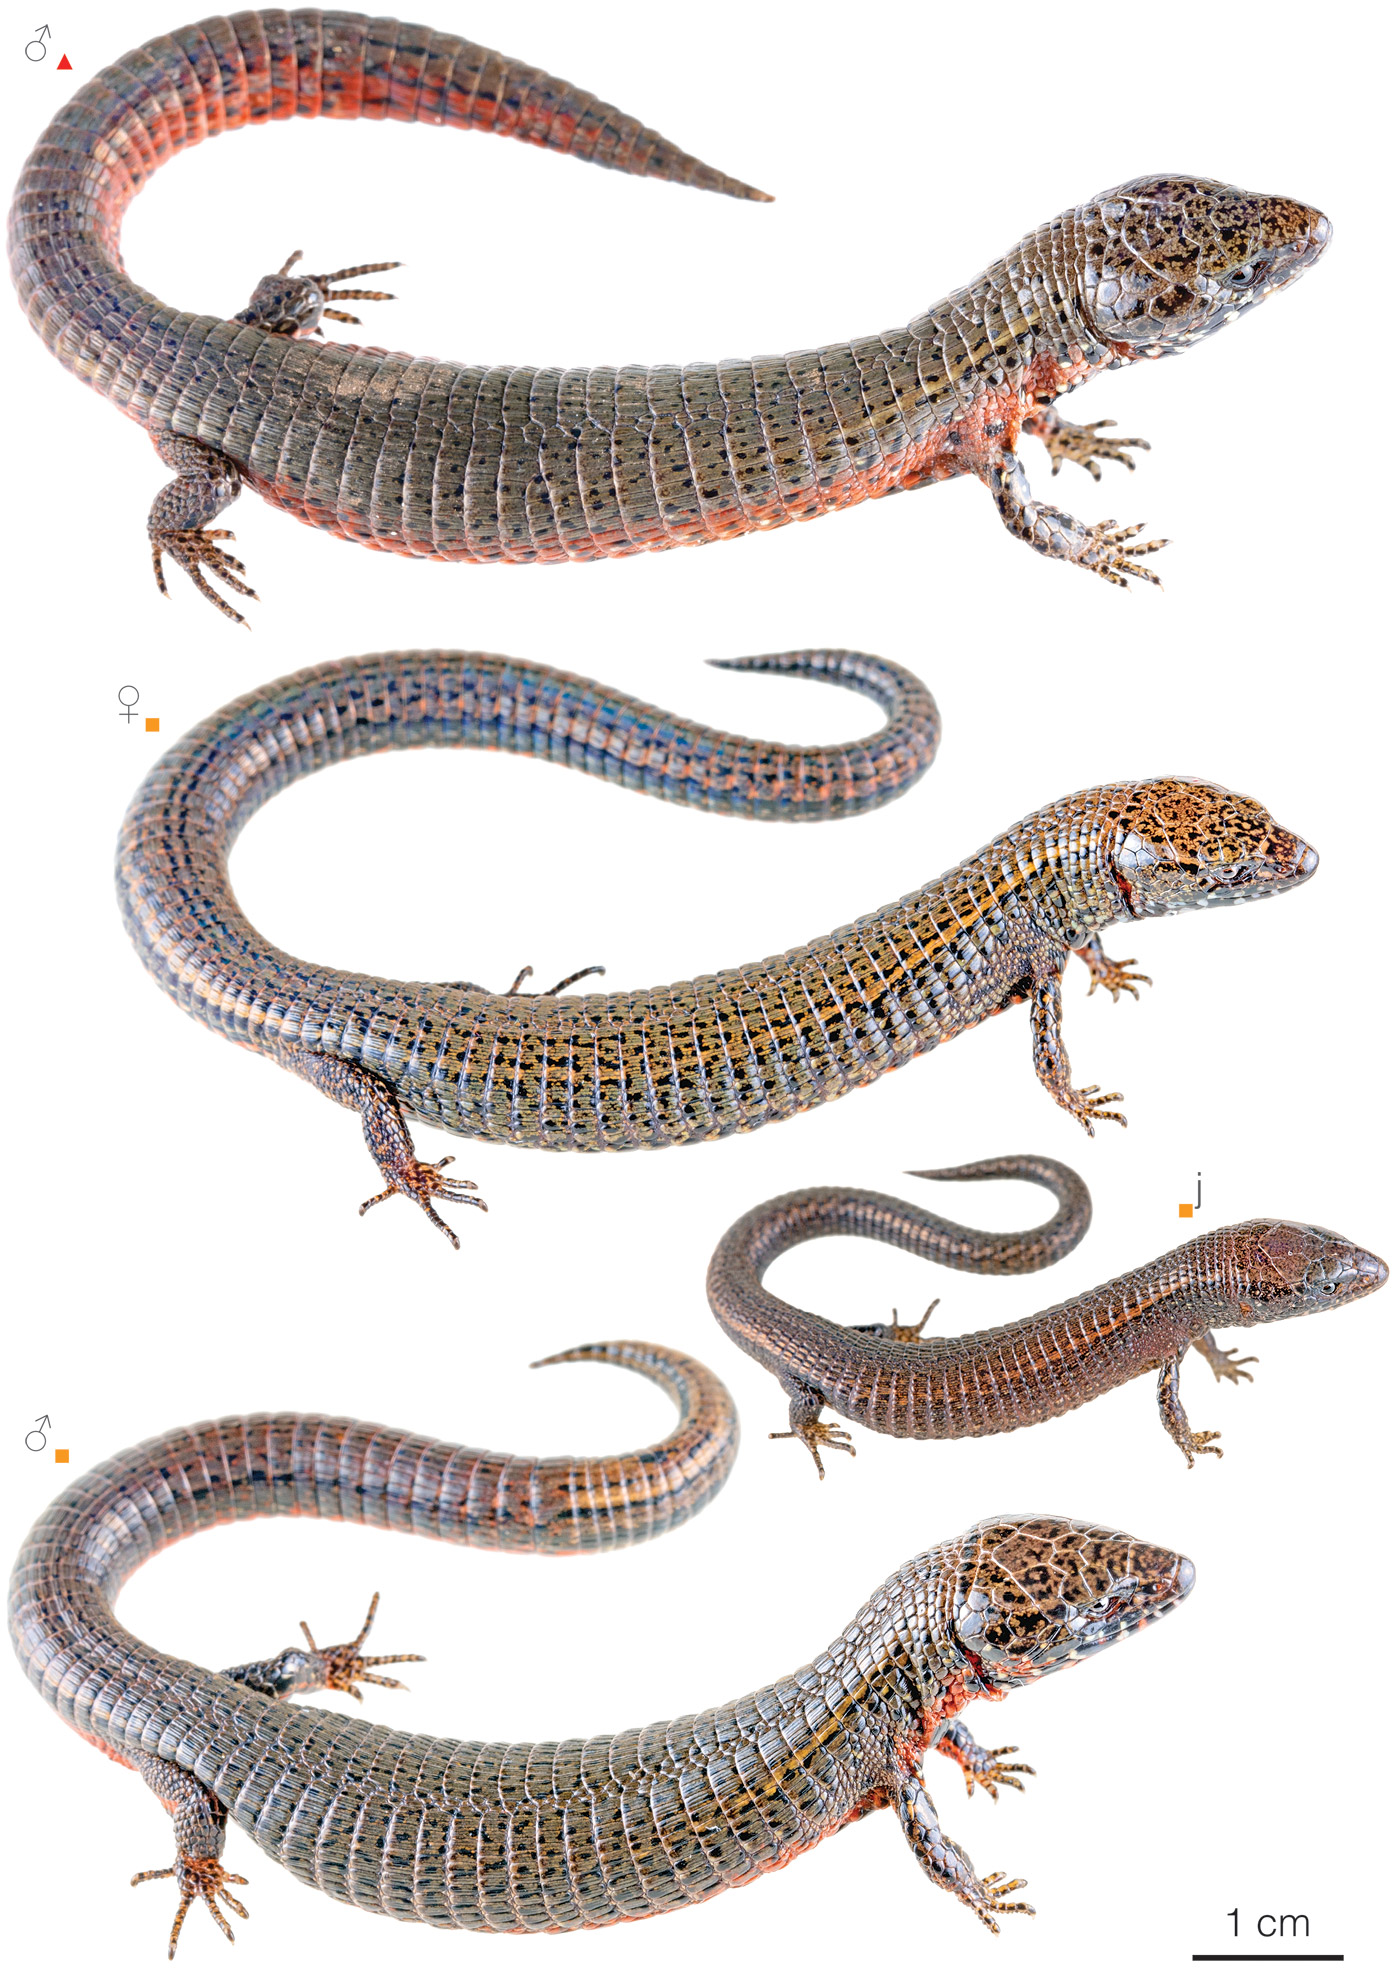 Variation among individuals of Riama unicolor